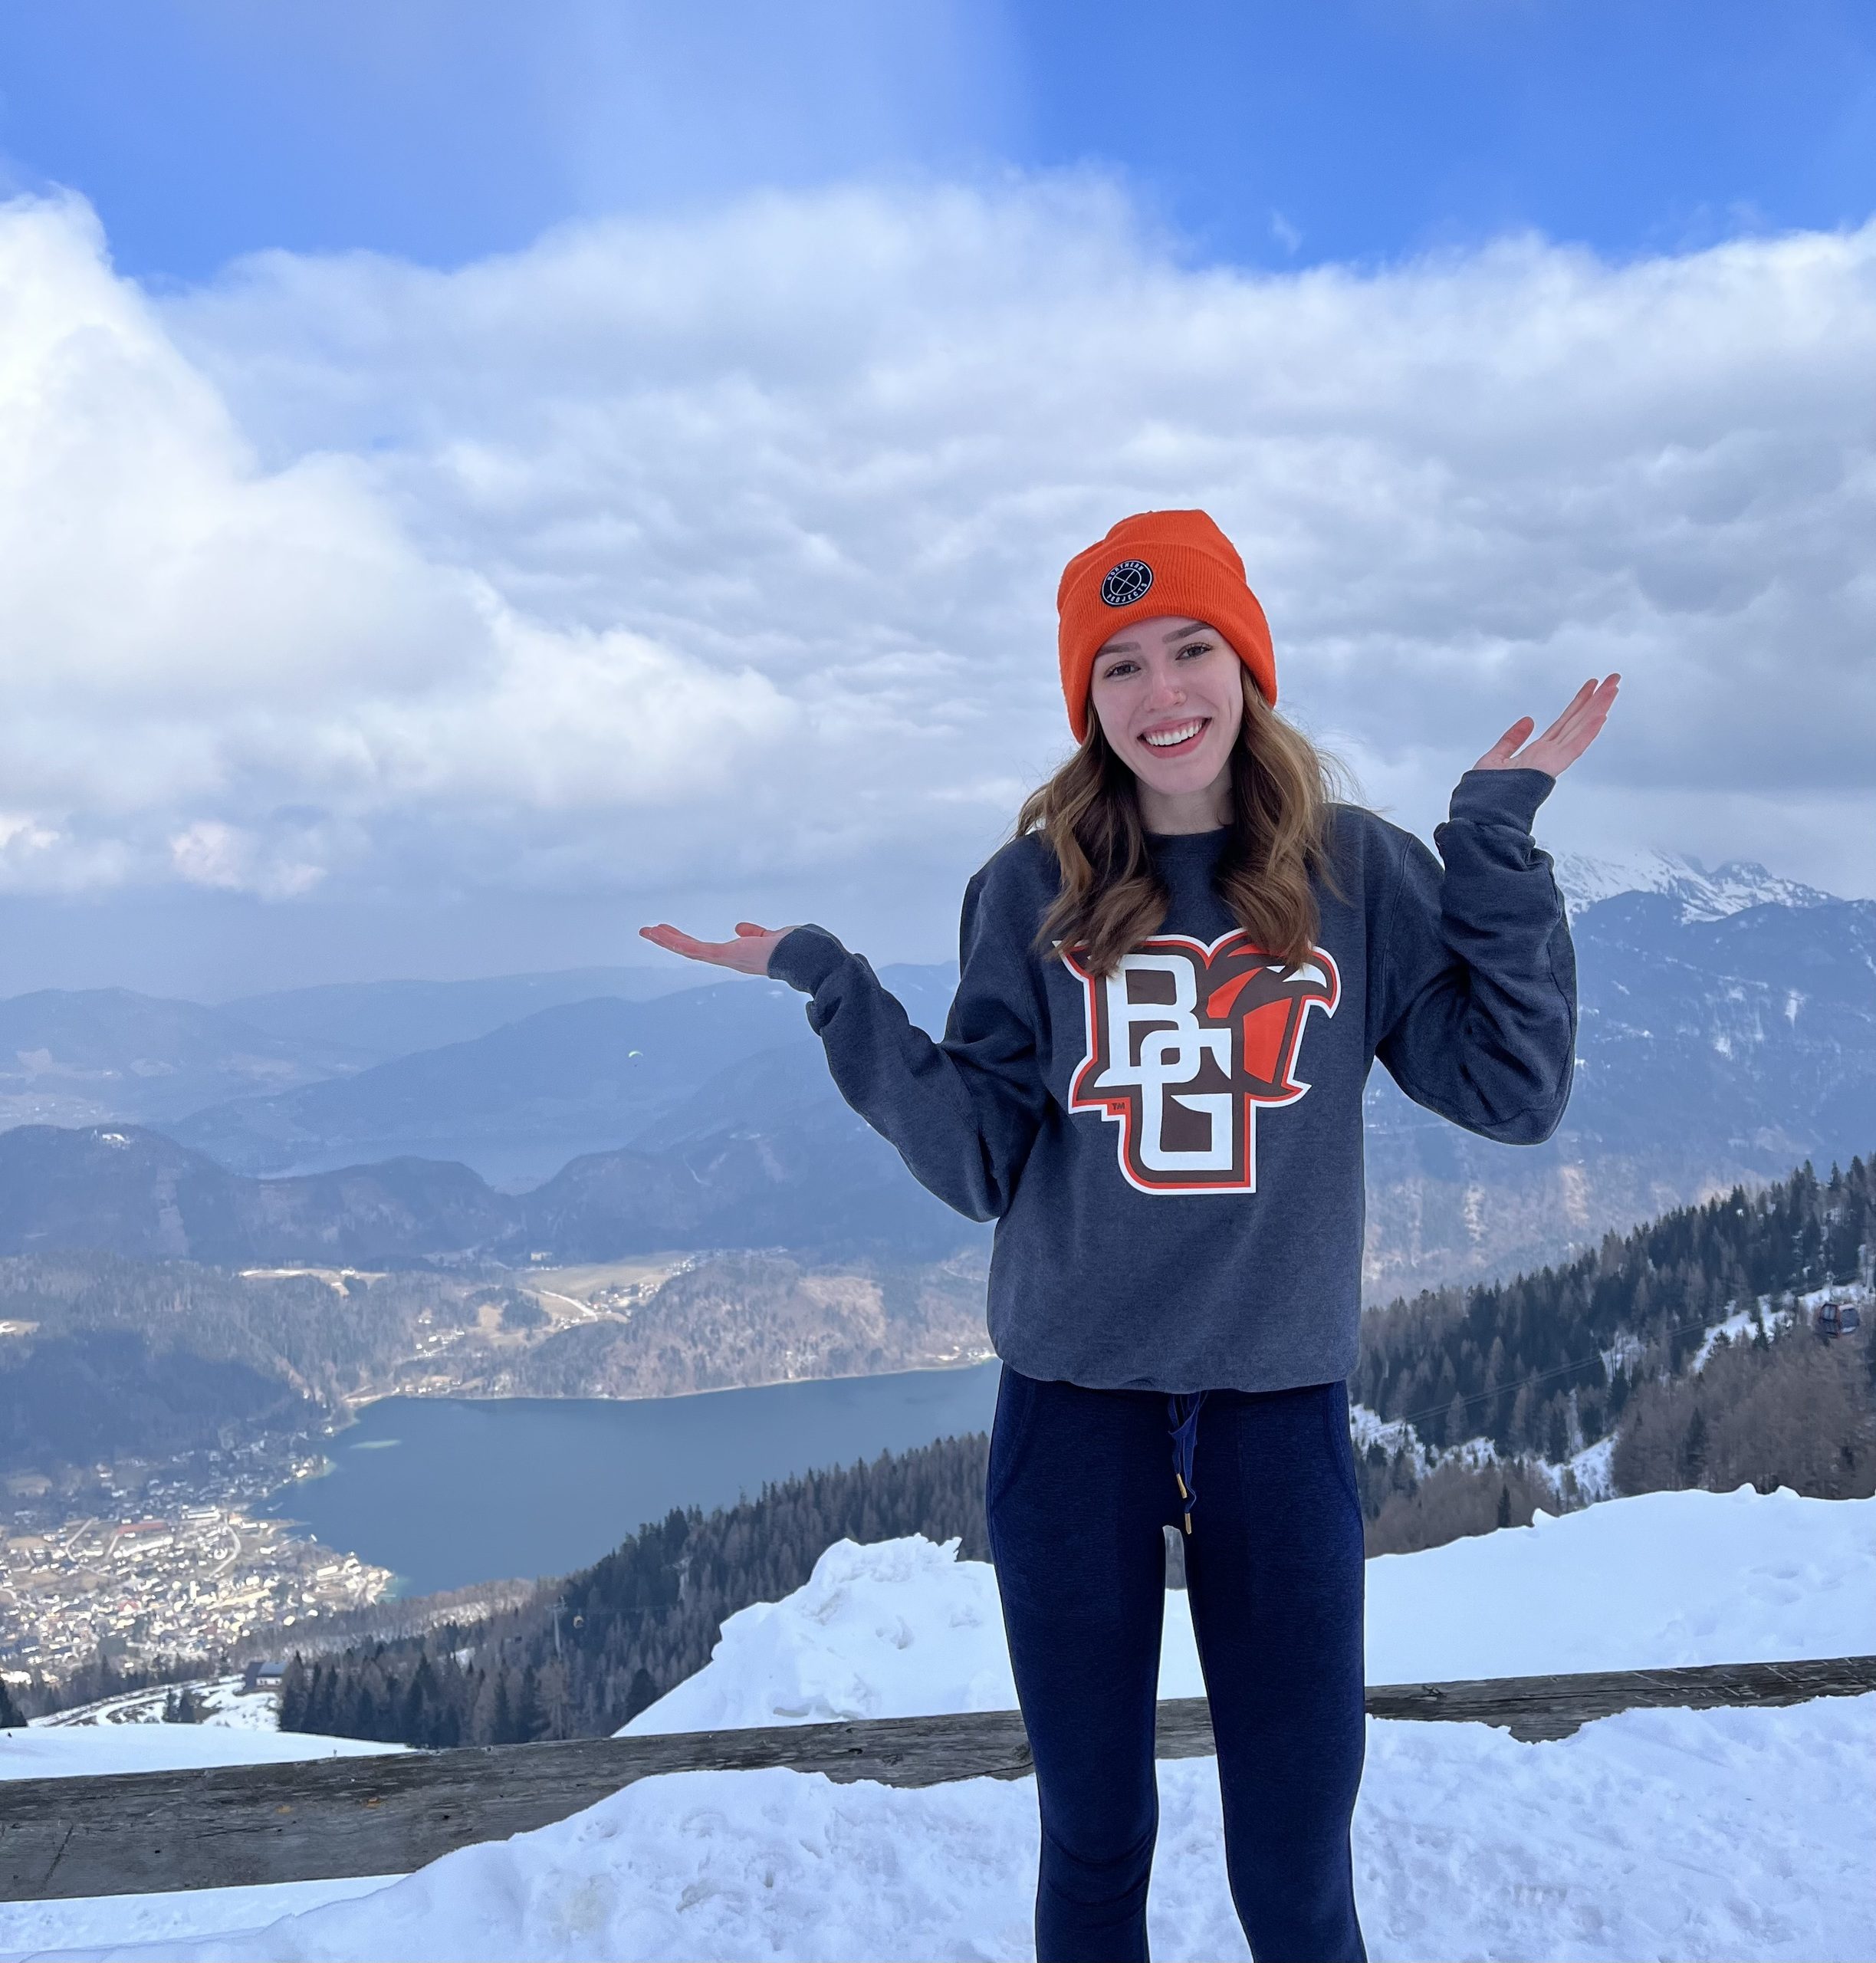 Student in BGSU sweatshirt and orange hat stands with hands out in front of a snowy mountain scenery